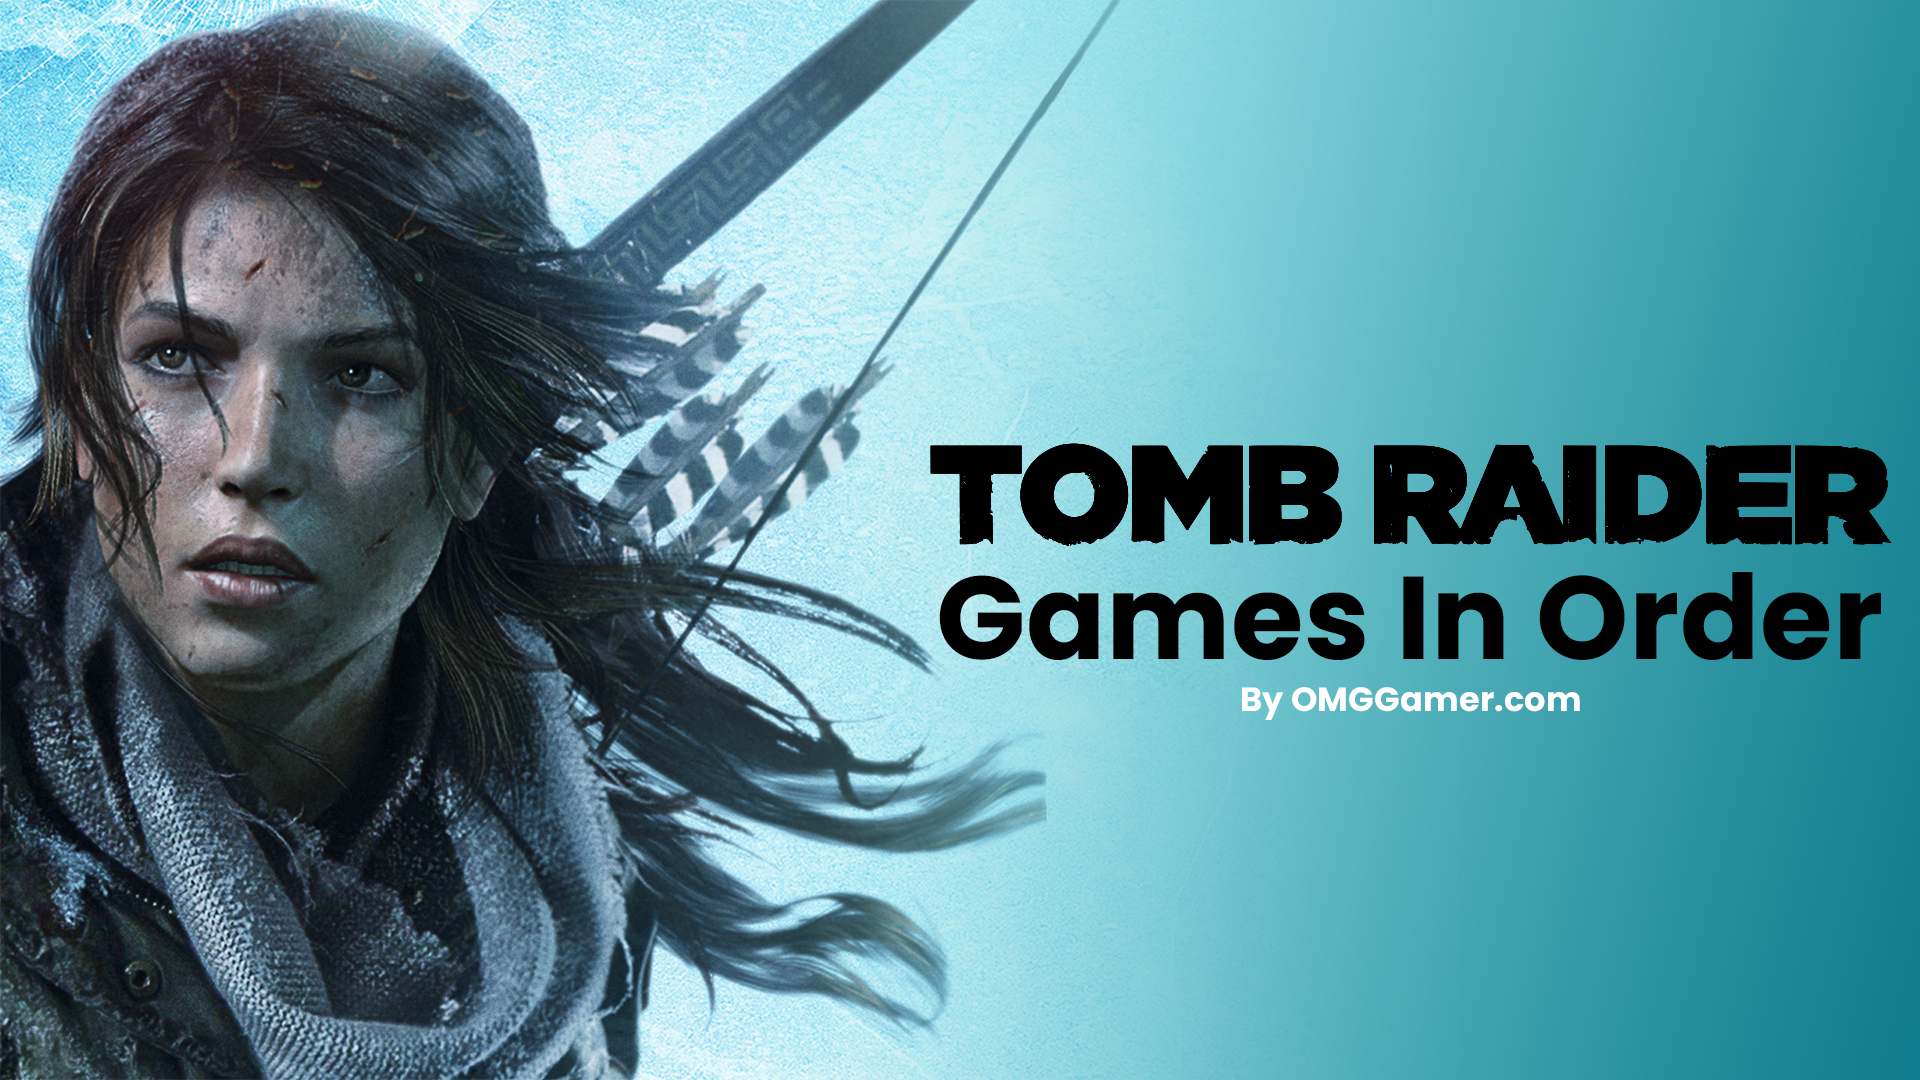 TOMB RAIDER GAMES IN ORDER